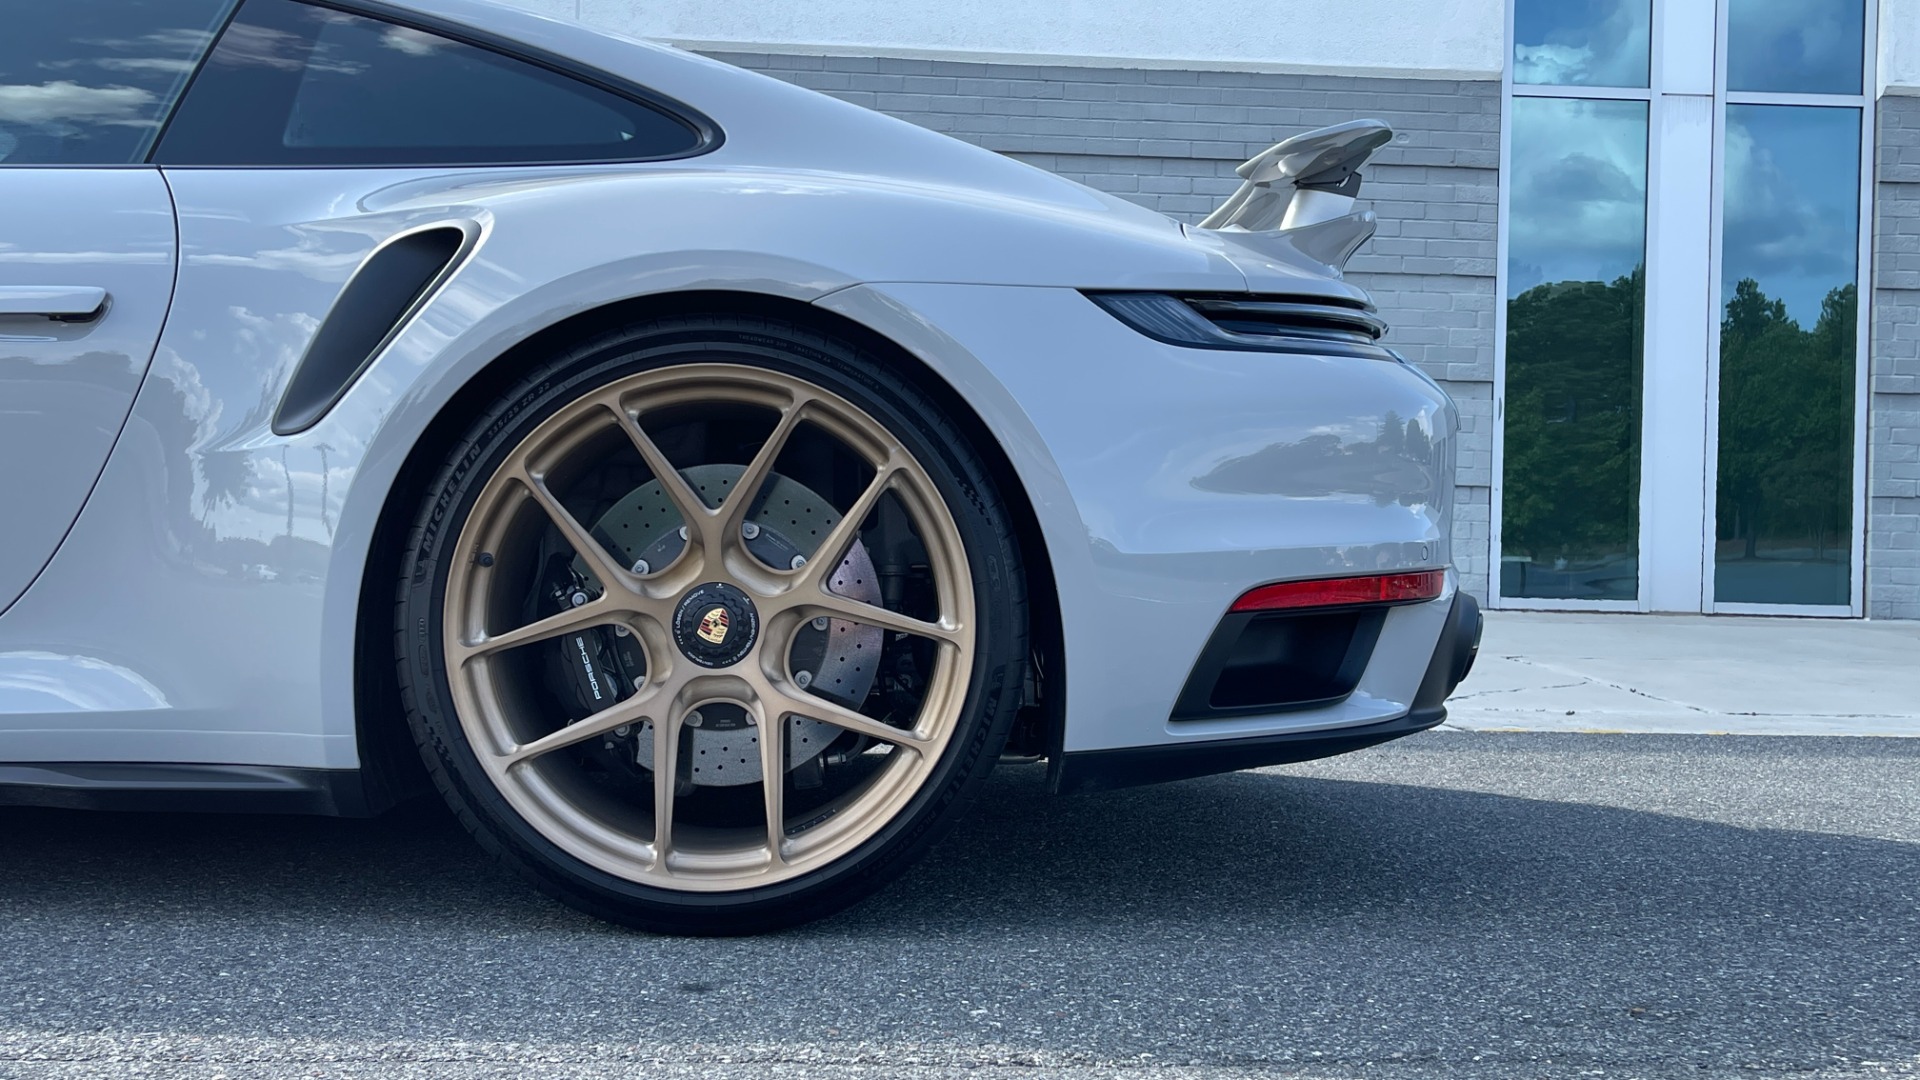 Used 2021 Porsche 911 Turbo S / HRE WHEELS / FRONT LIFT / MATRIX LIGHTS / PASM SUSPENSION for sale Sold at Formula Imports in Charlotte NC 28227 67